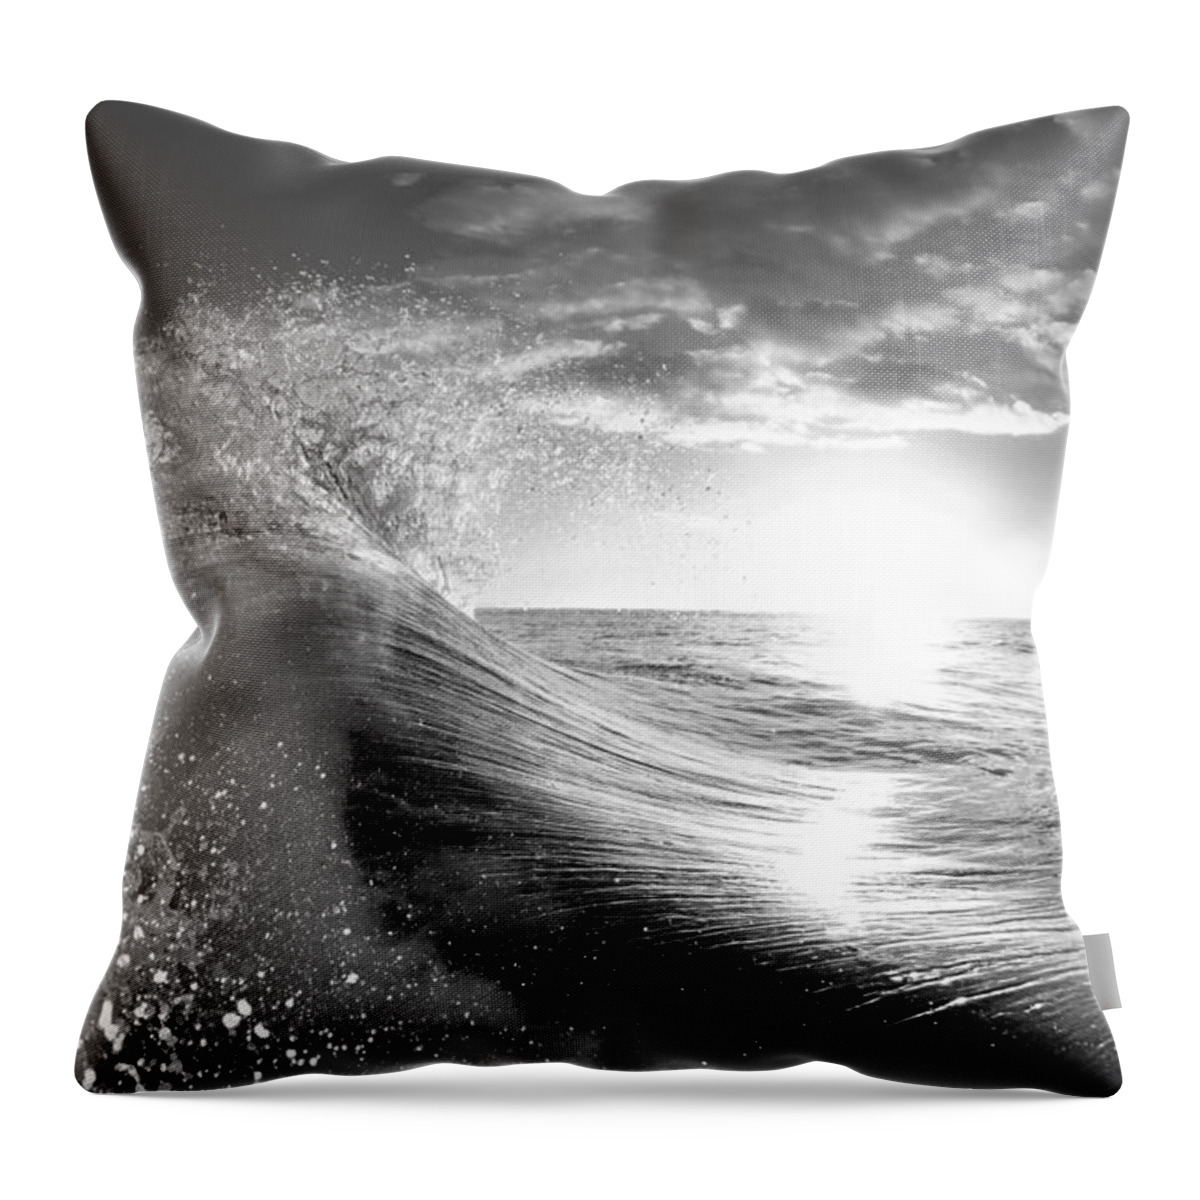  Black And White Throw Pillow featuring the photograph Shiny Comforter by Sean Davey